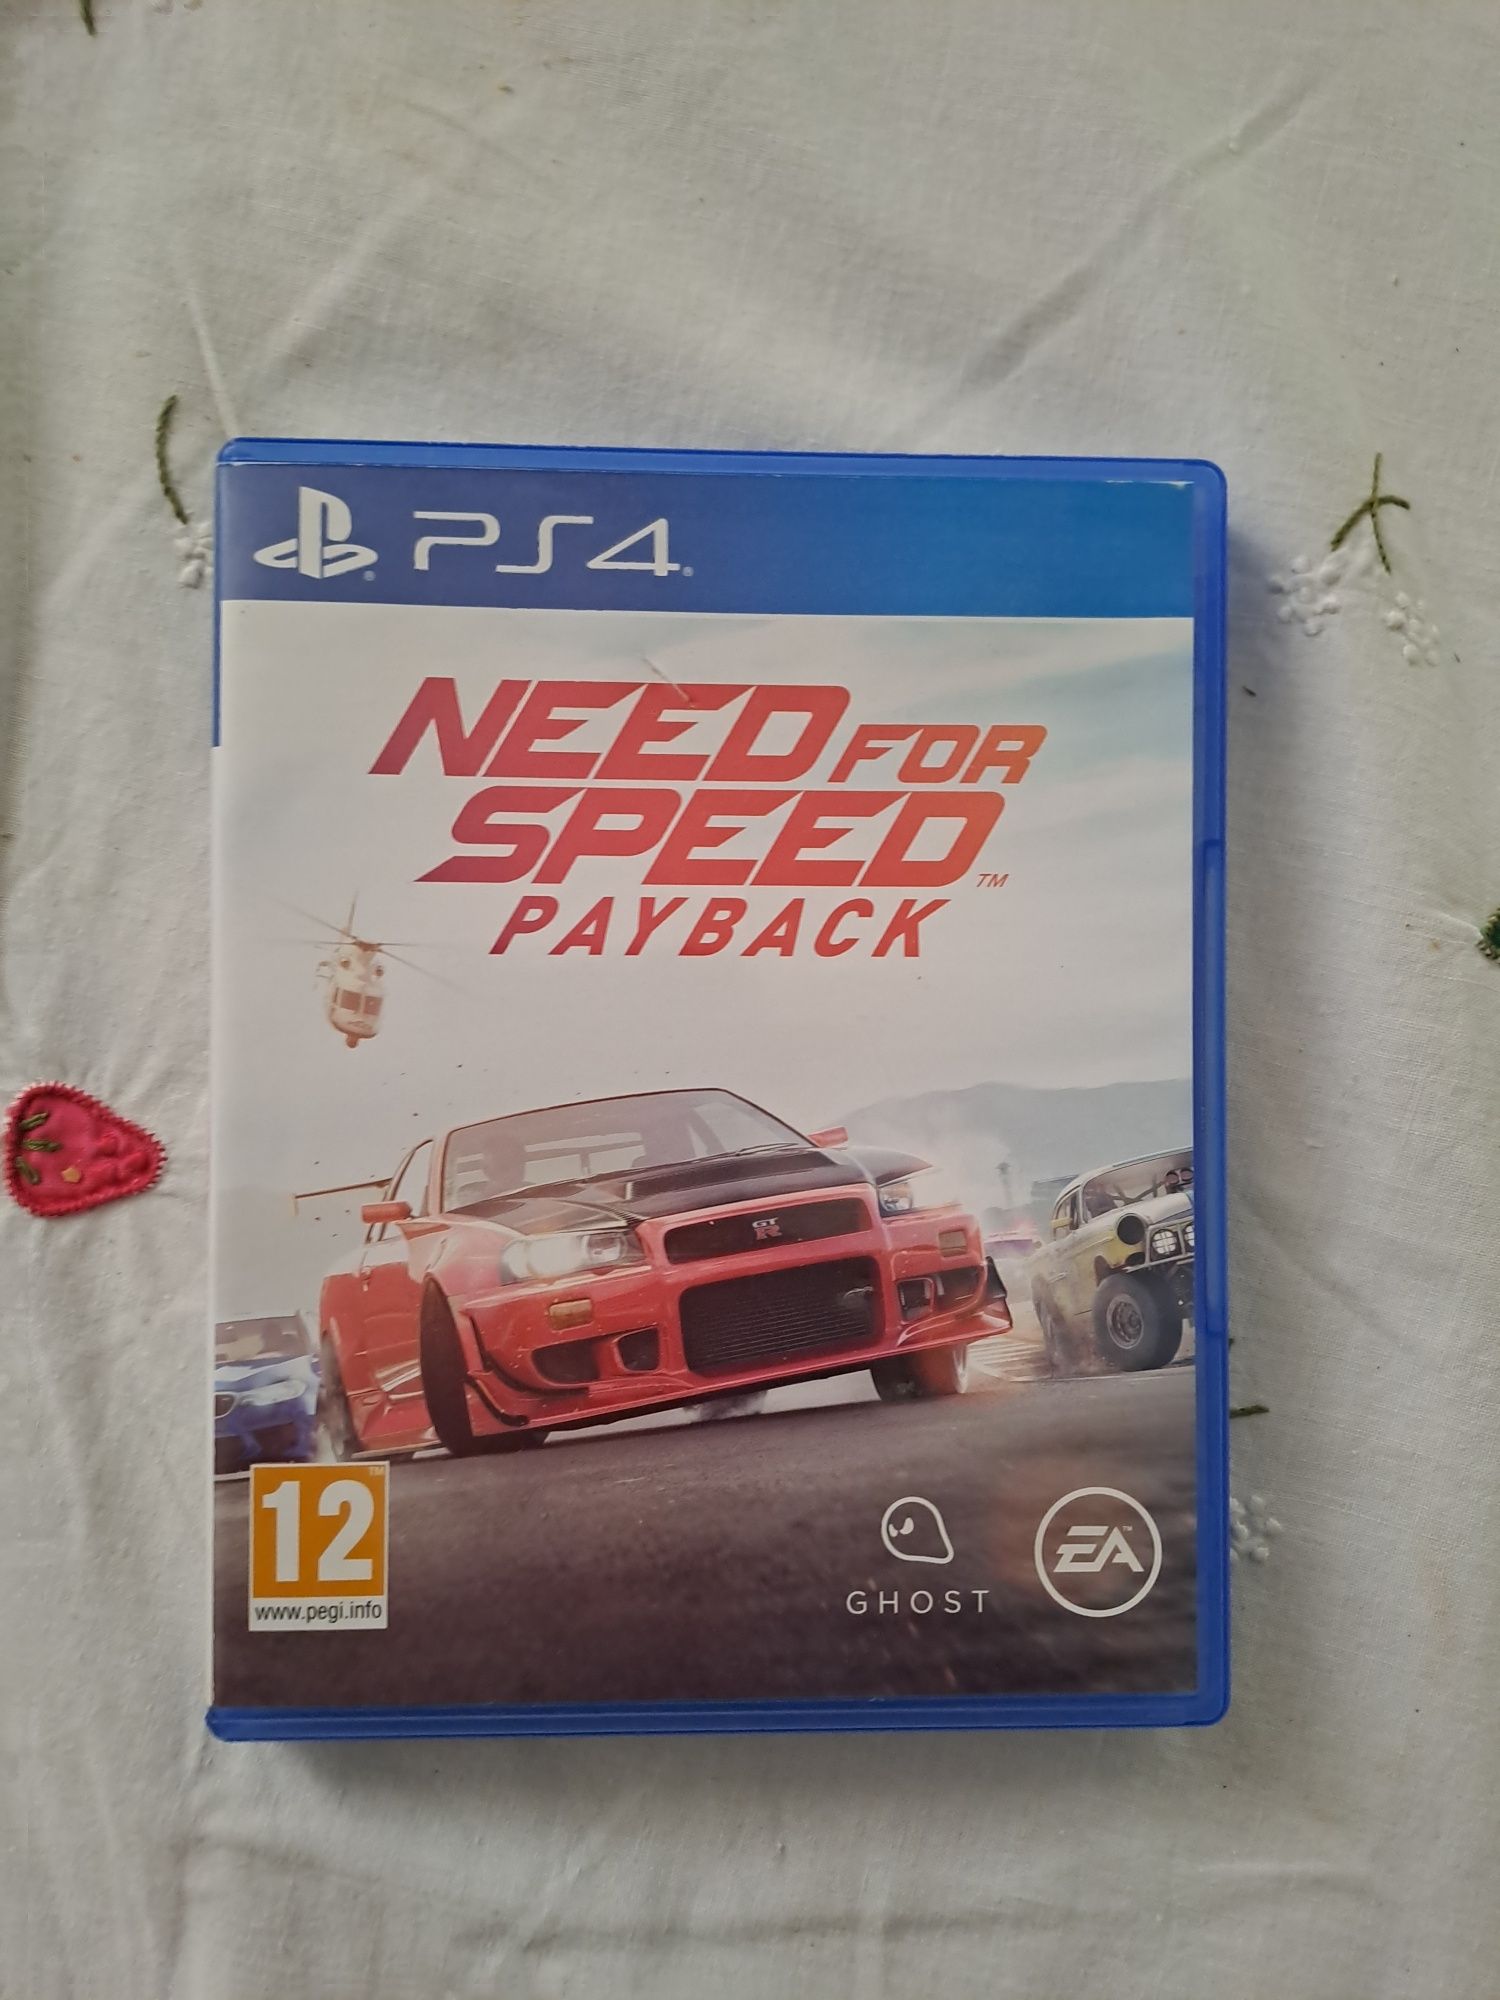 Jogo Need for Speed Payback para PS4